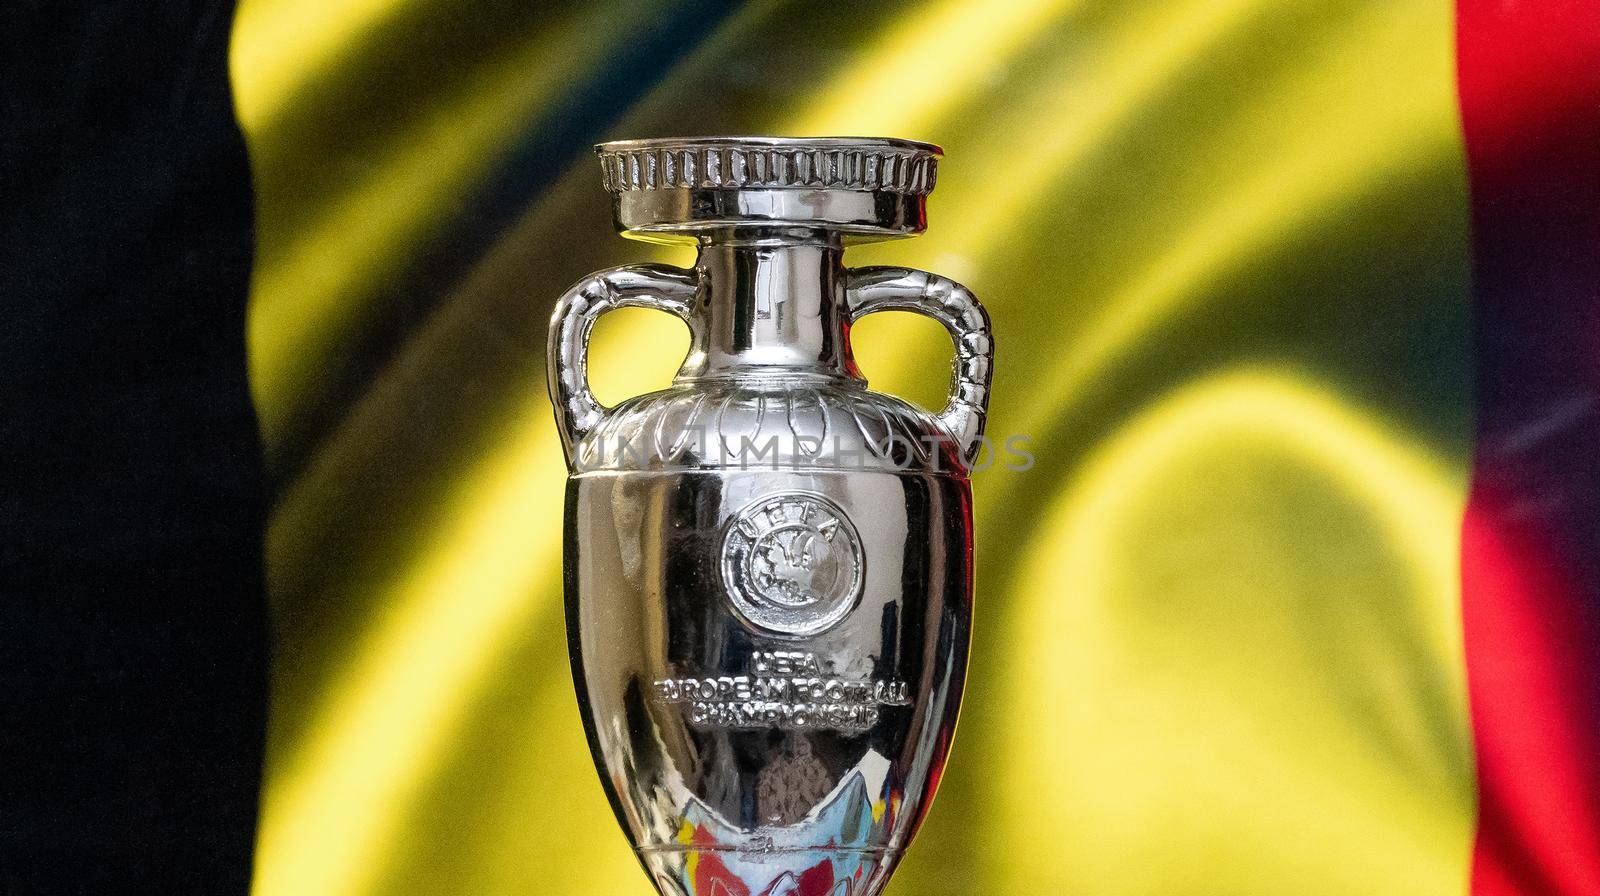 April 10, 2021. Brussels, Belgium. UEFA European Championship Cup with Belgium flag in the background.